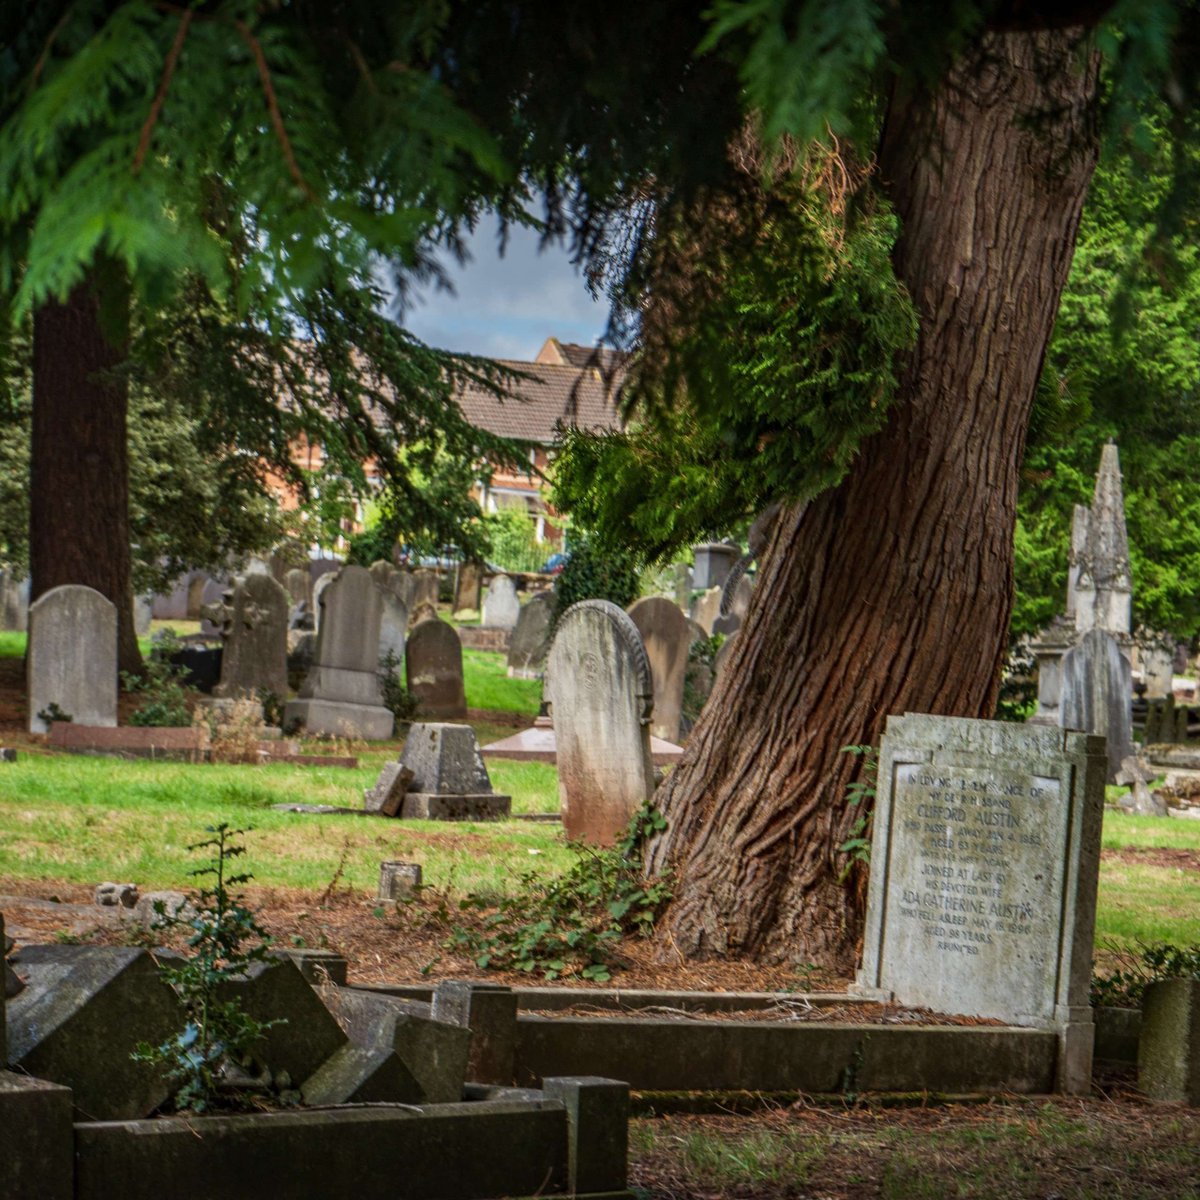 Join us in London Road Cemetery for the Dead Good Death Festival, 3-5 May, a space to explore topics relating to life and death in the beautiful surroundings of Paxton's Arboretum. Details and booking on our website historiccoventrytrust.org.uk/whats-on/